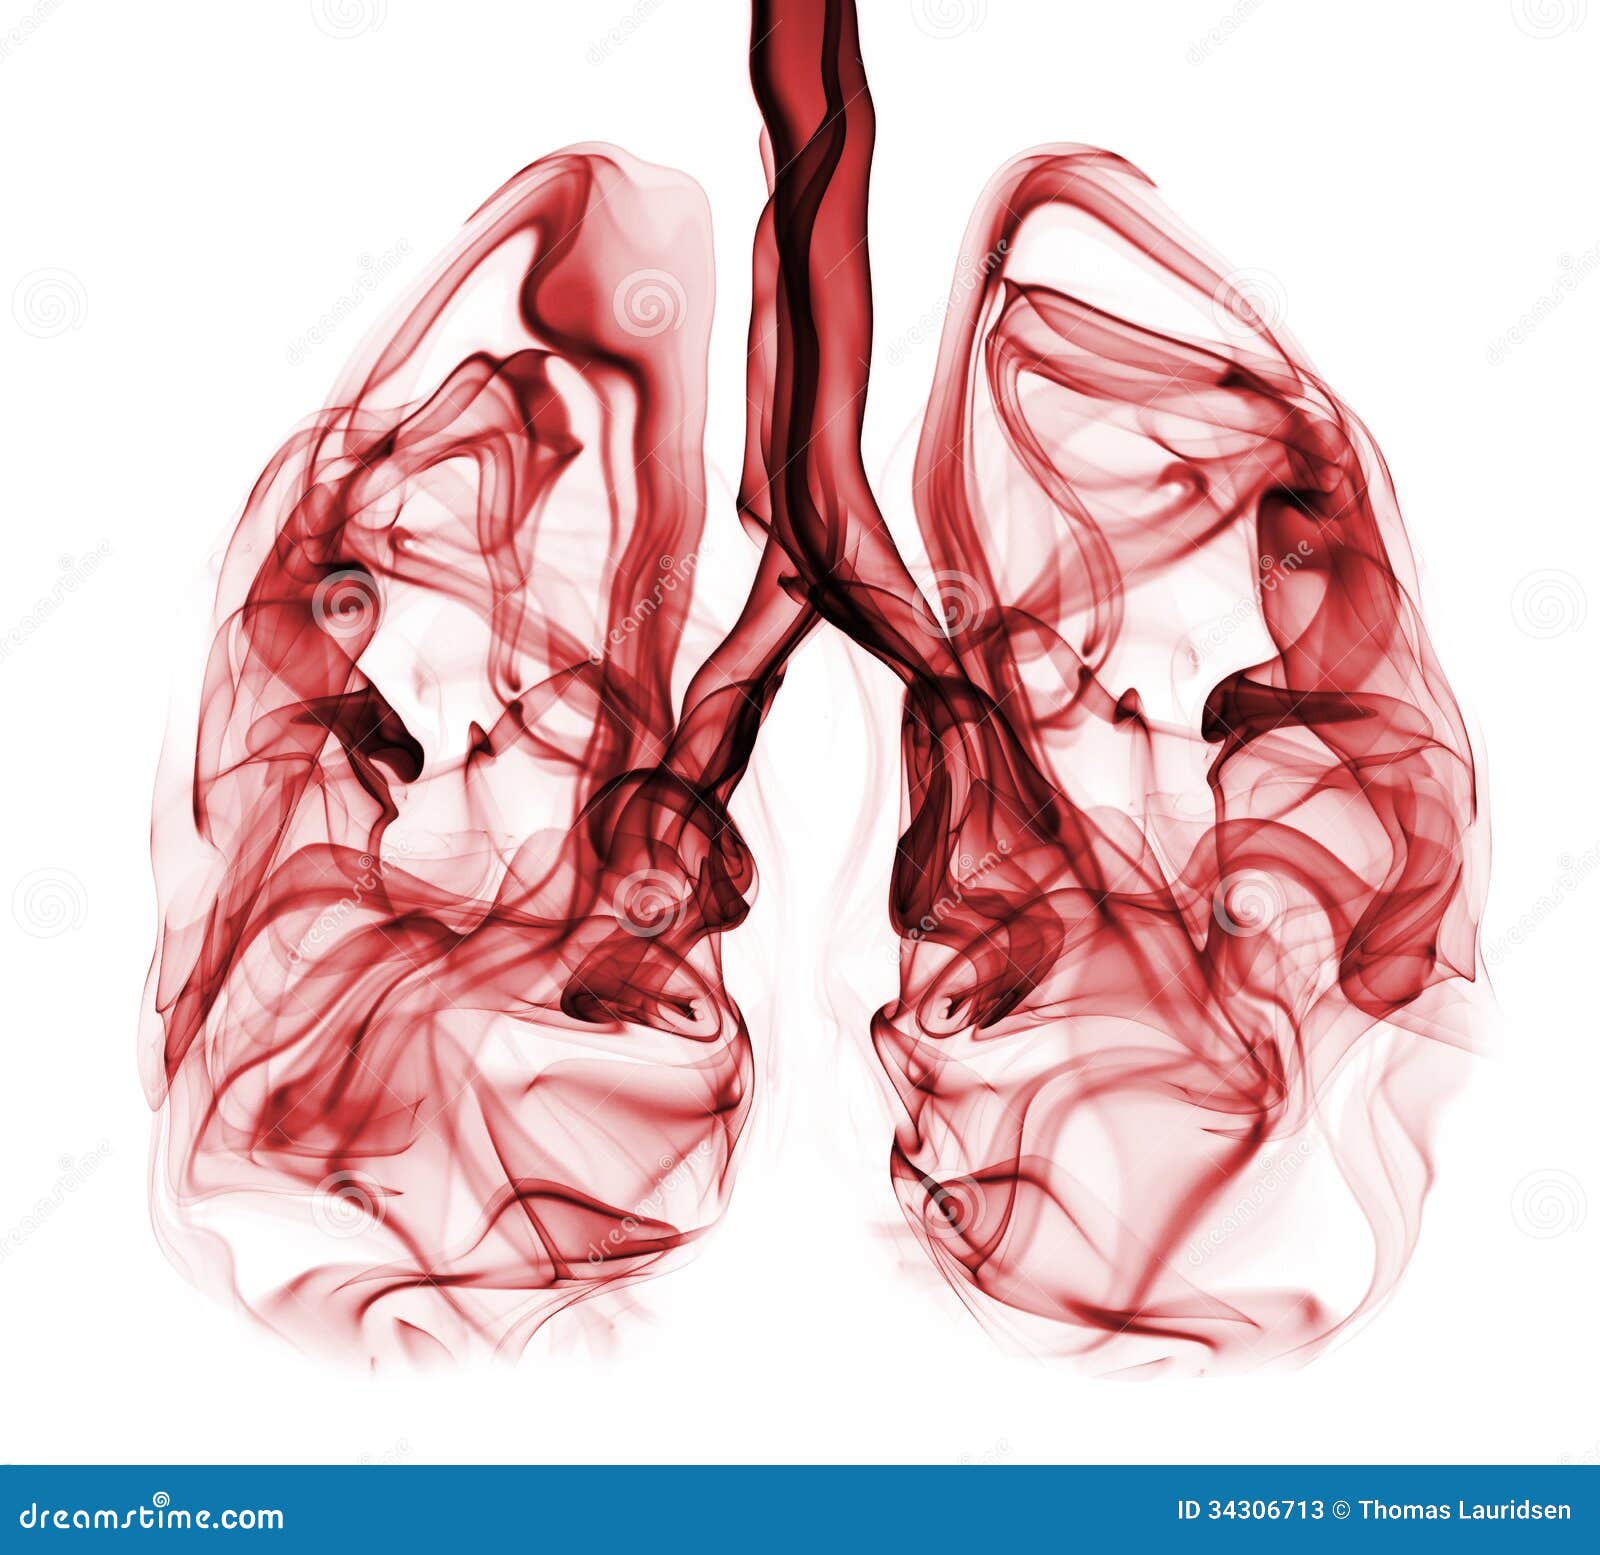 Lung Cancer Illustrated As Smoke Shaped As Lungs Stock Illustration -  Illustration of illness, smoking: 34306713